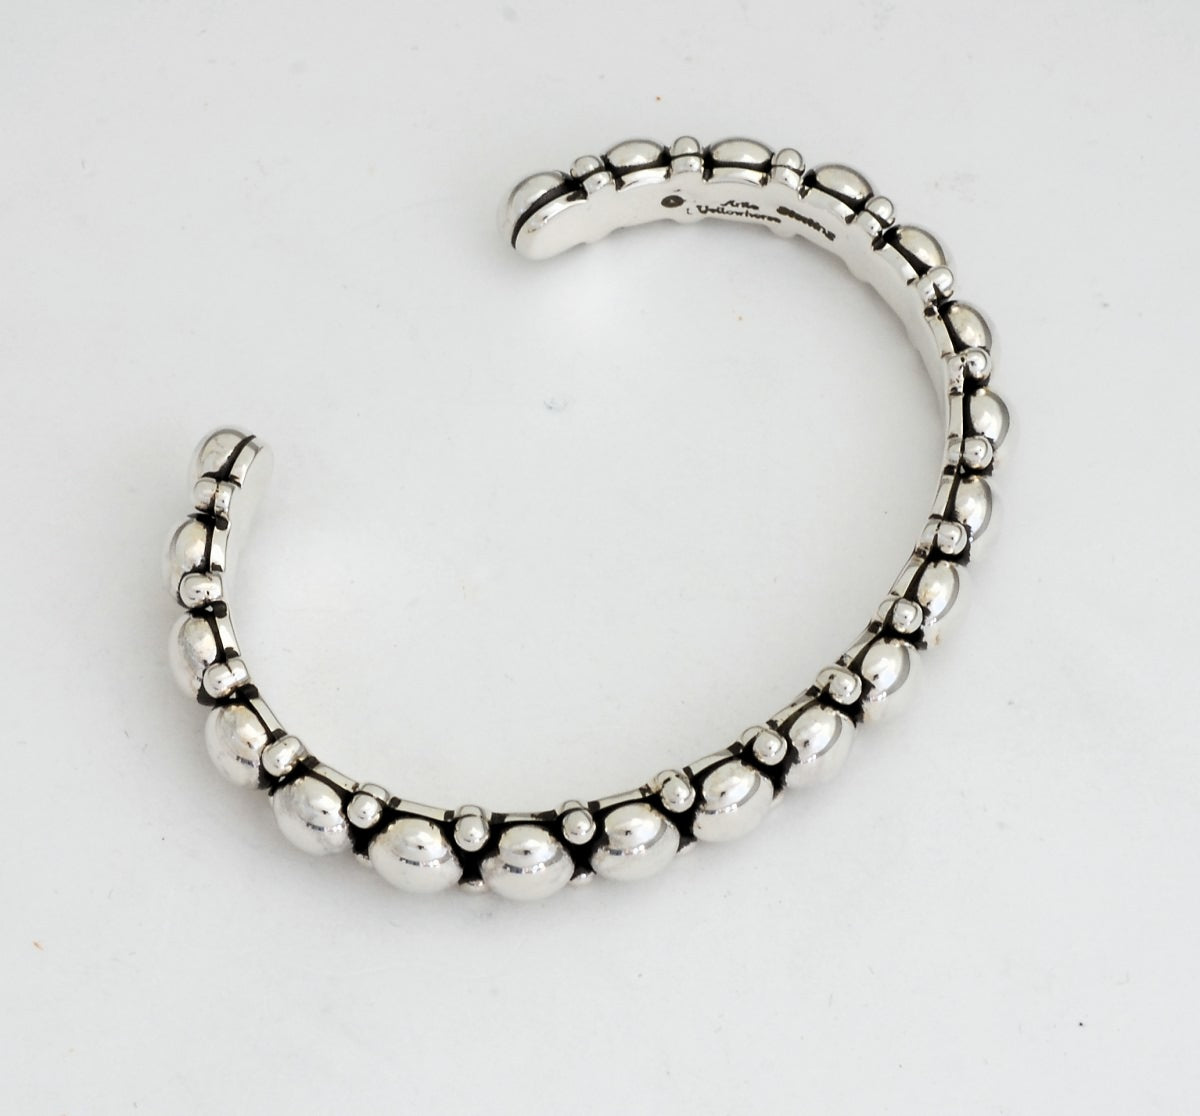 Bracelet with "Domes and Dots" by Artie Yellowhorse